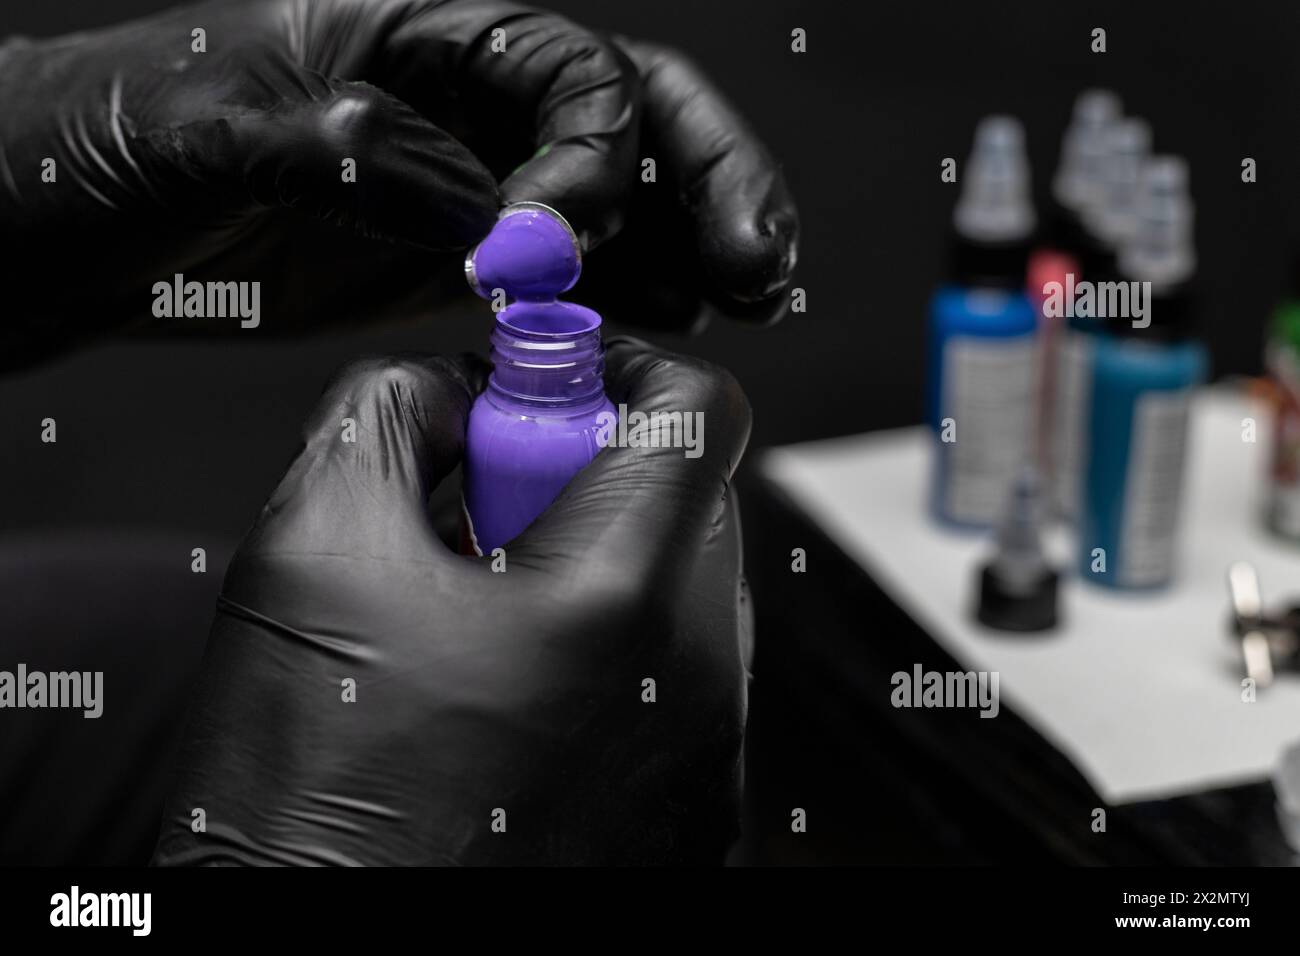 Uncapping a bottle of purple tattoo ink, background of bottles of different inks and work table. Body art concept Stock Photo